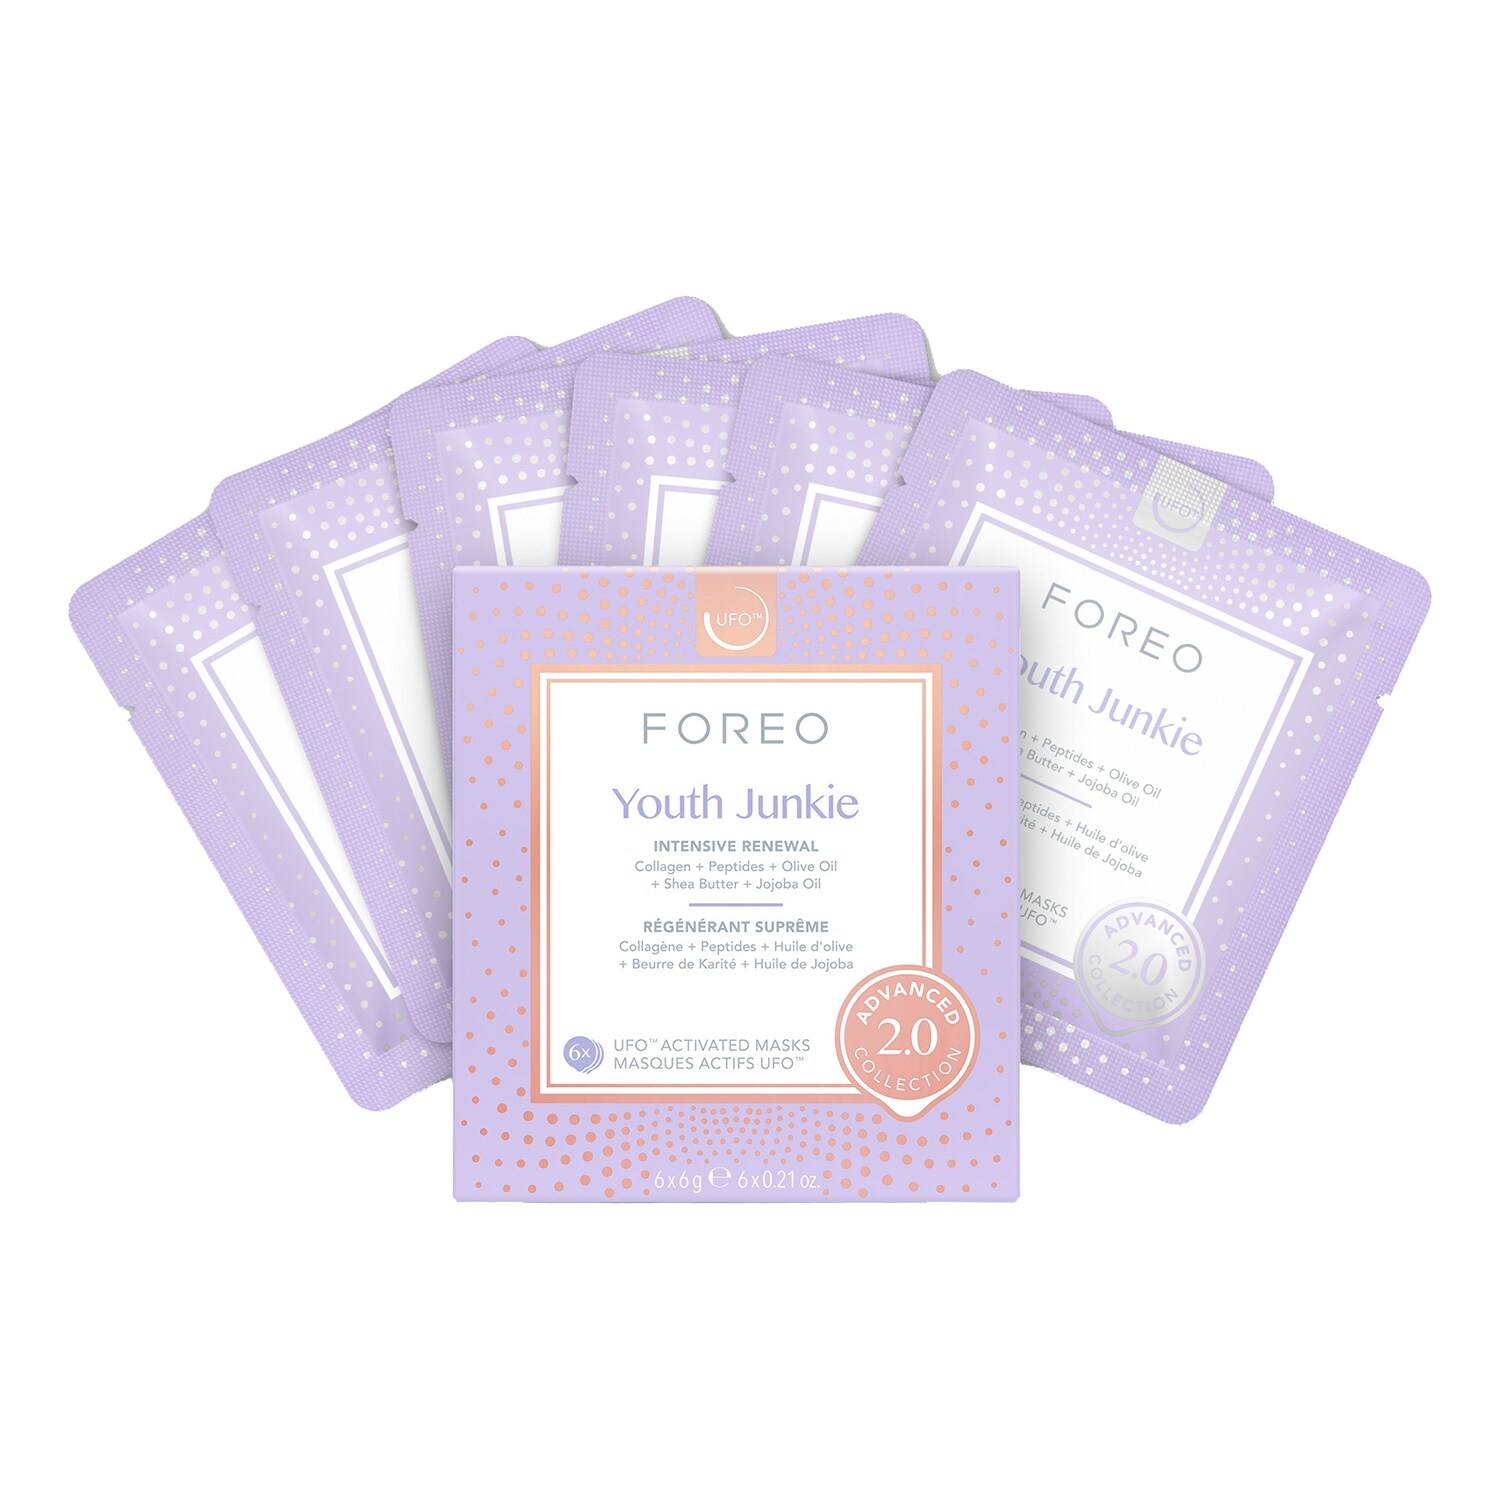 foreo ufo masks youth junkie 2.0 - intensive renewal mask 6 pieces